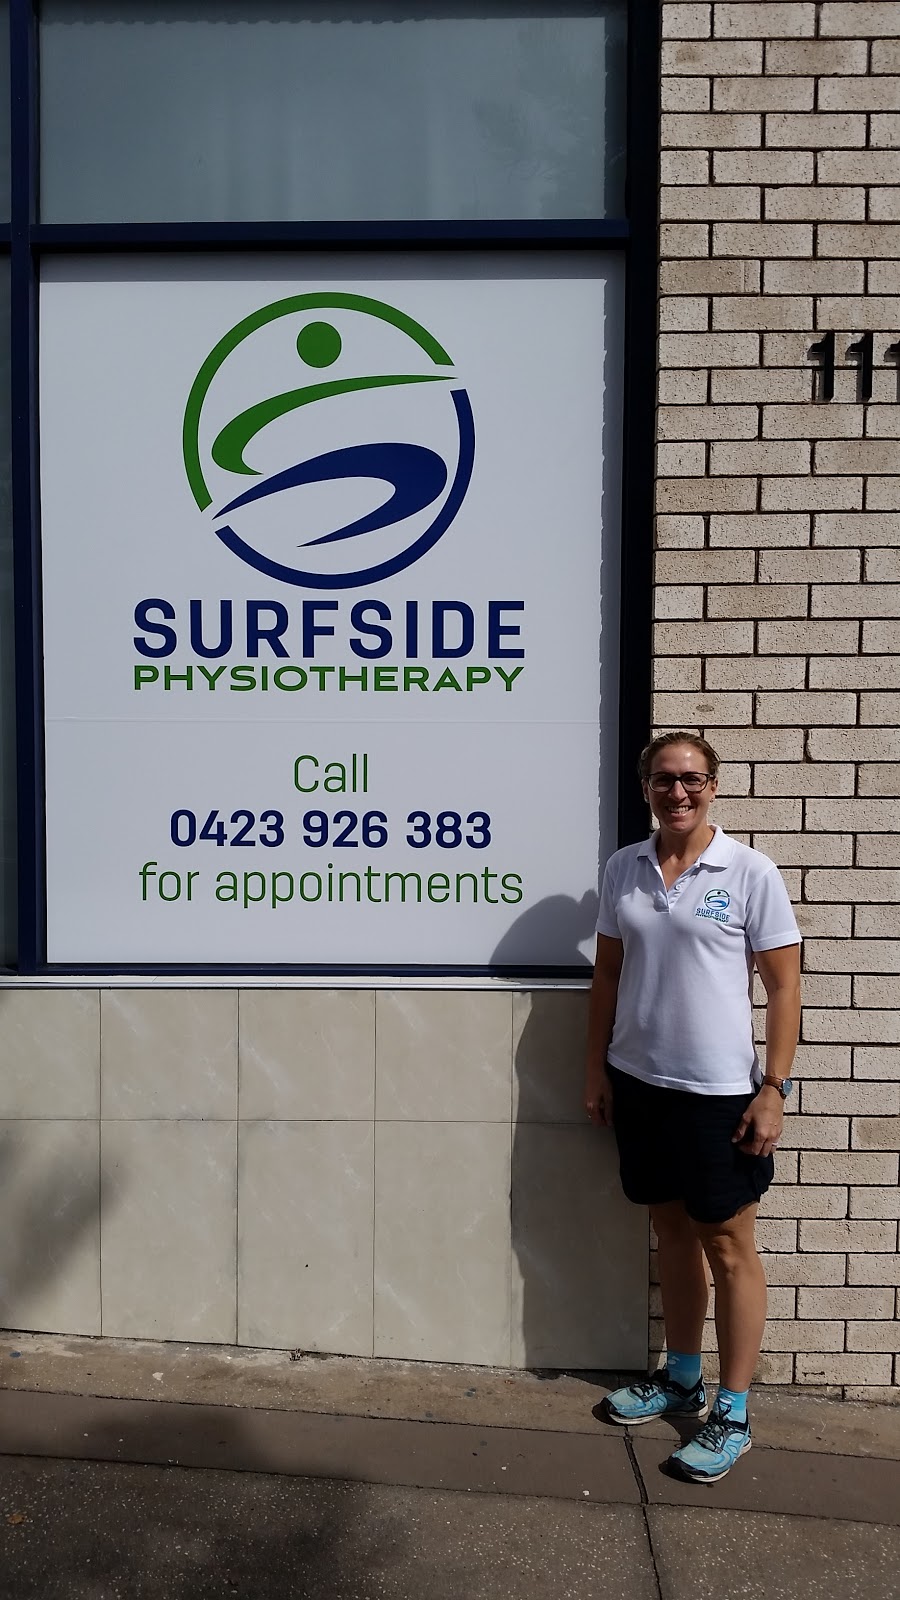 Surfside Physiotherapy | physiotherapist | 109-111 Wentworth St, Port Kembla NSW 2505, Australia | 0423926383 OR +61 423 926 383